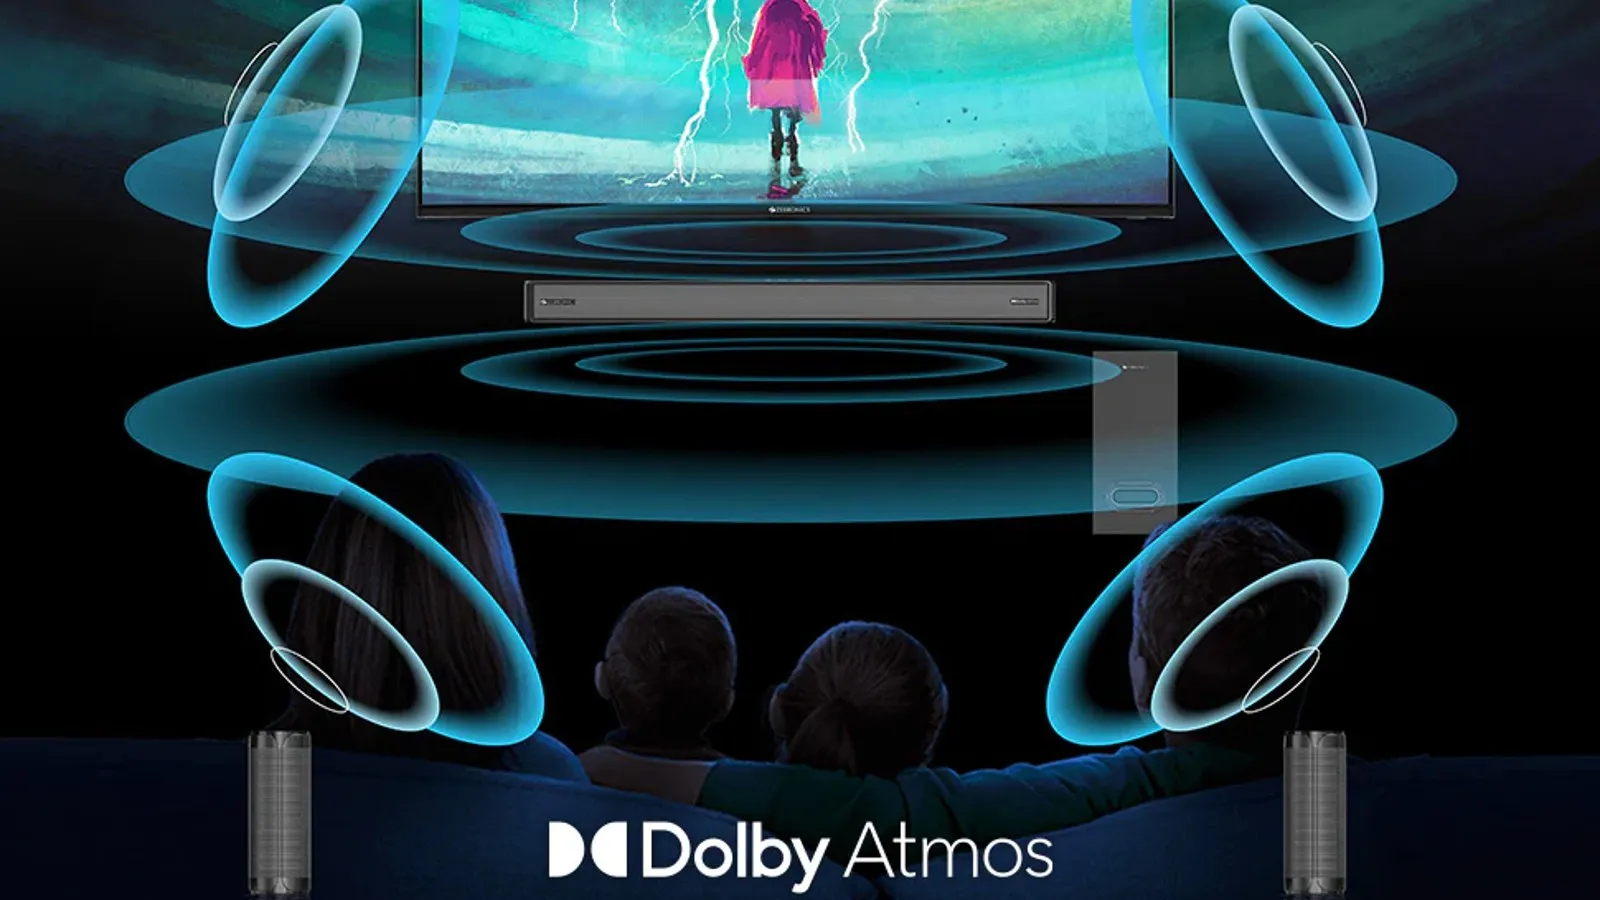 What is Dolby Atmos technology?